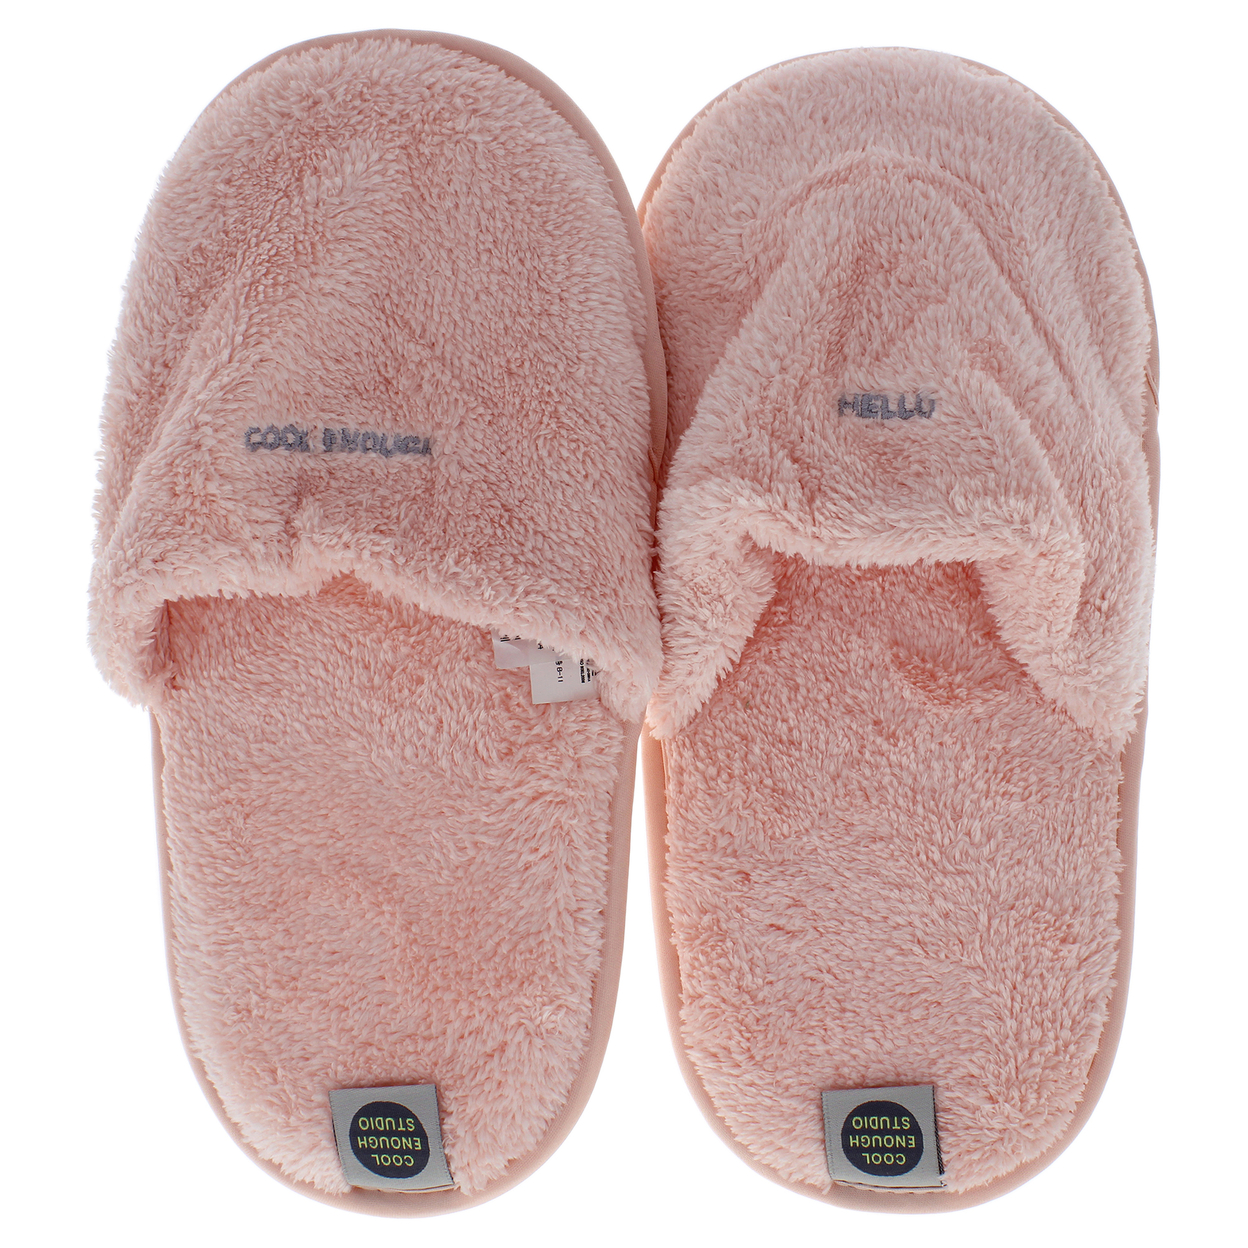 Cool Enough Studio The Towel Slippers Pink - Large 1 Pair